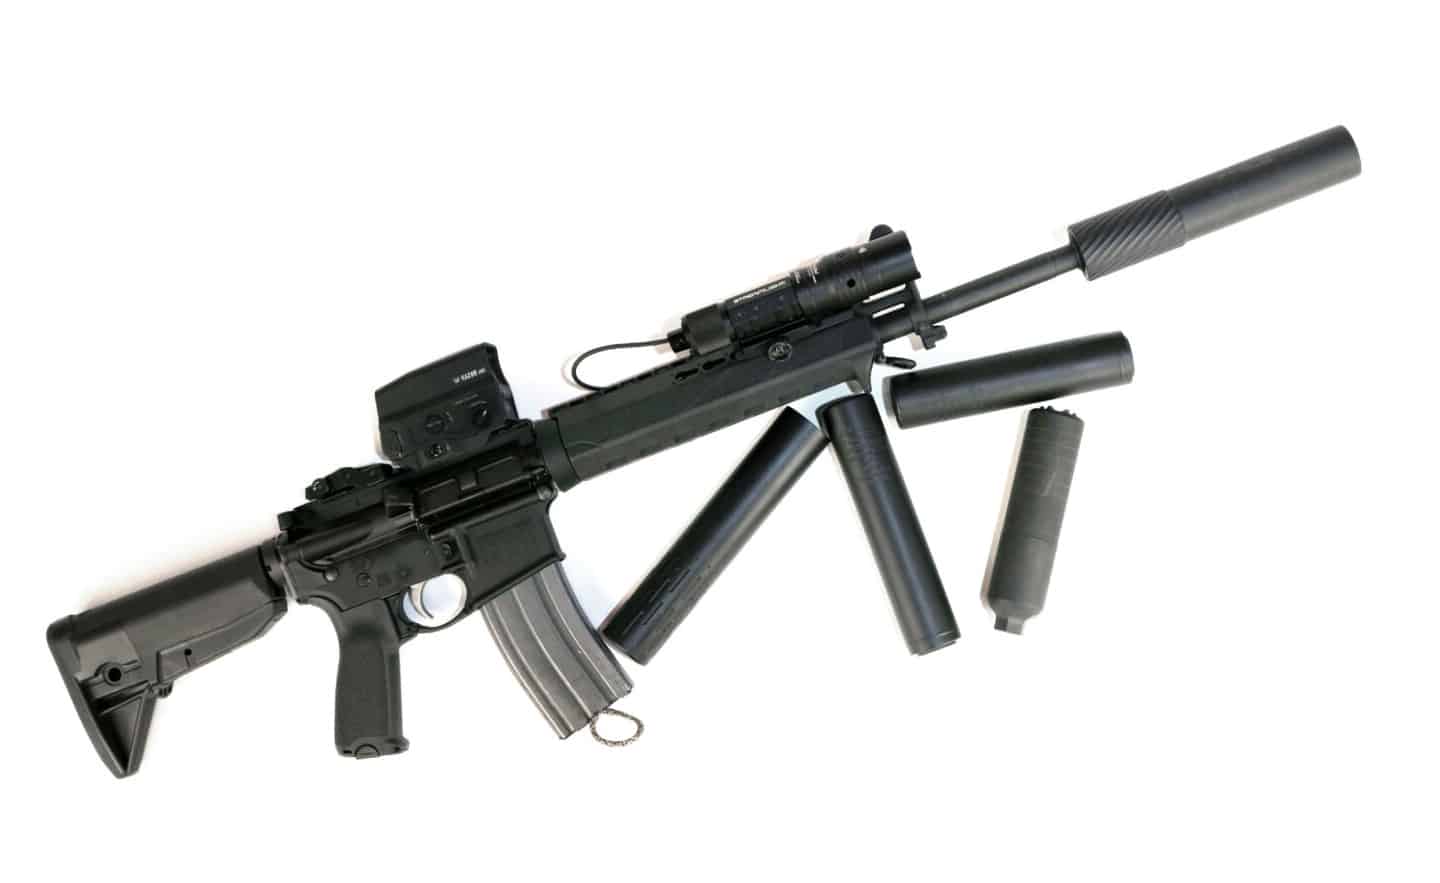 rifle with sound suppressors